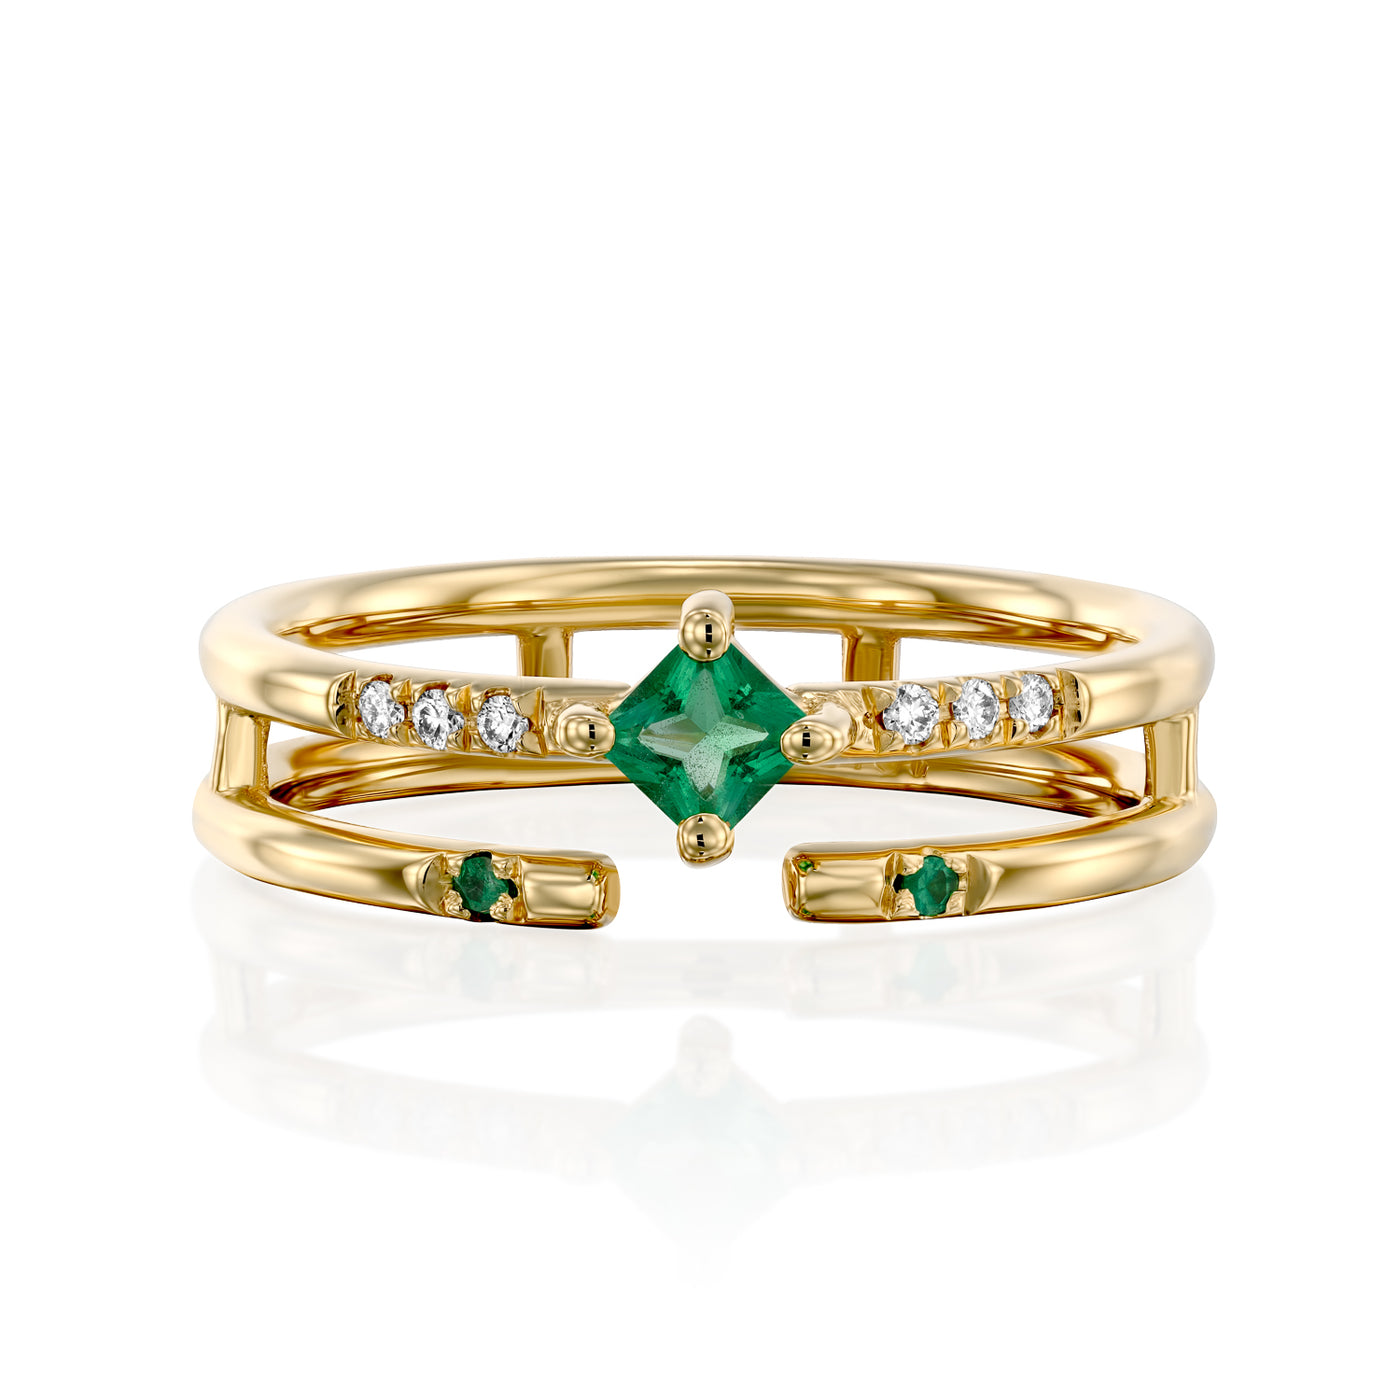 This is a unique Emerald and Diamonds engagement ring, set with Emerald and white Diamonds in a 14K/18K gold band, the perfect alternative boho wedding ring.